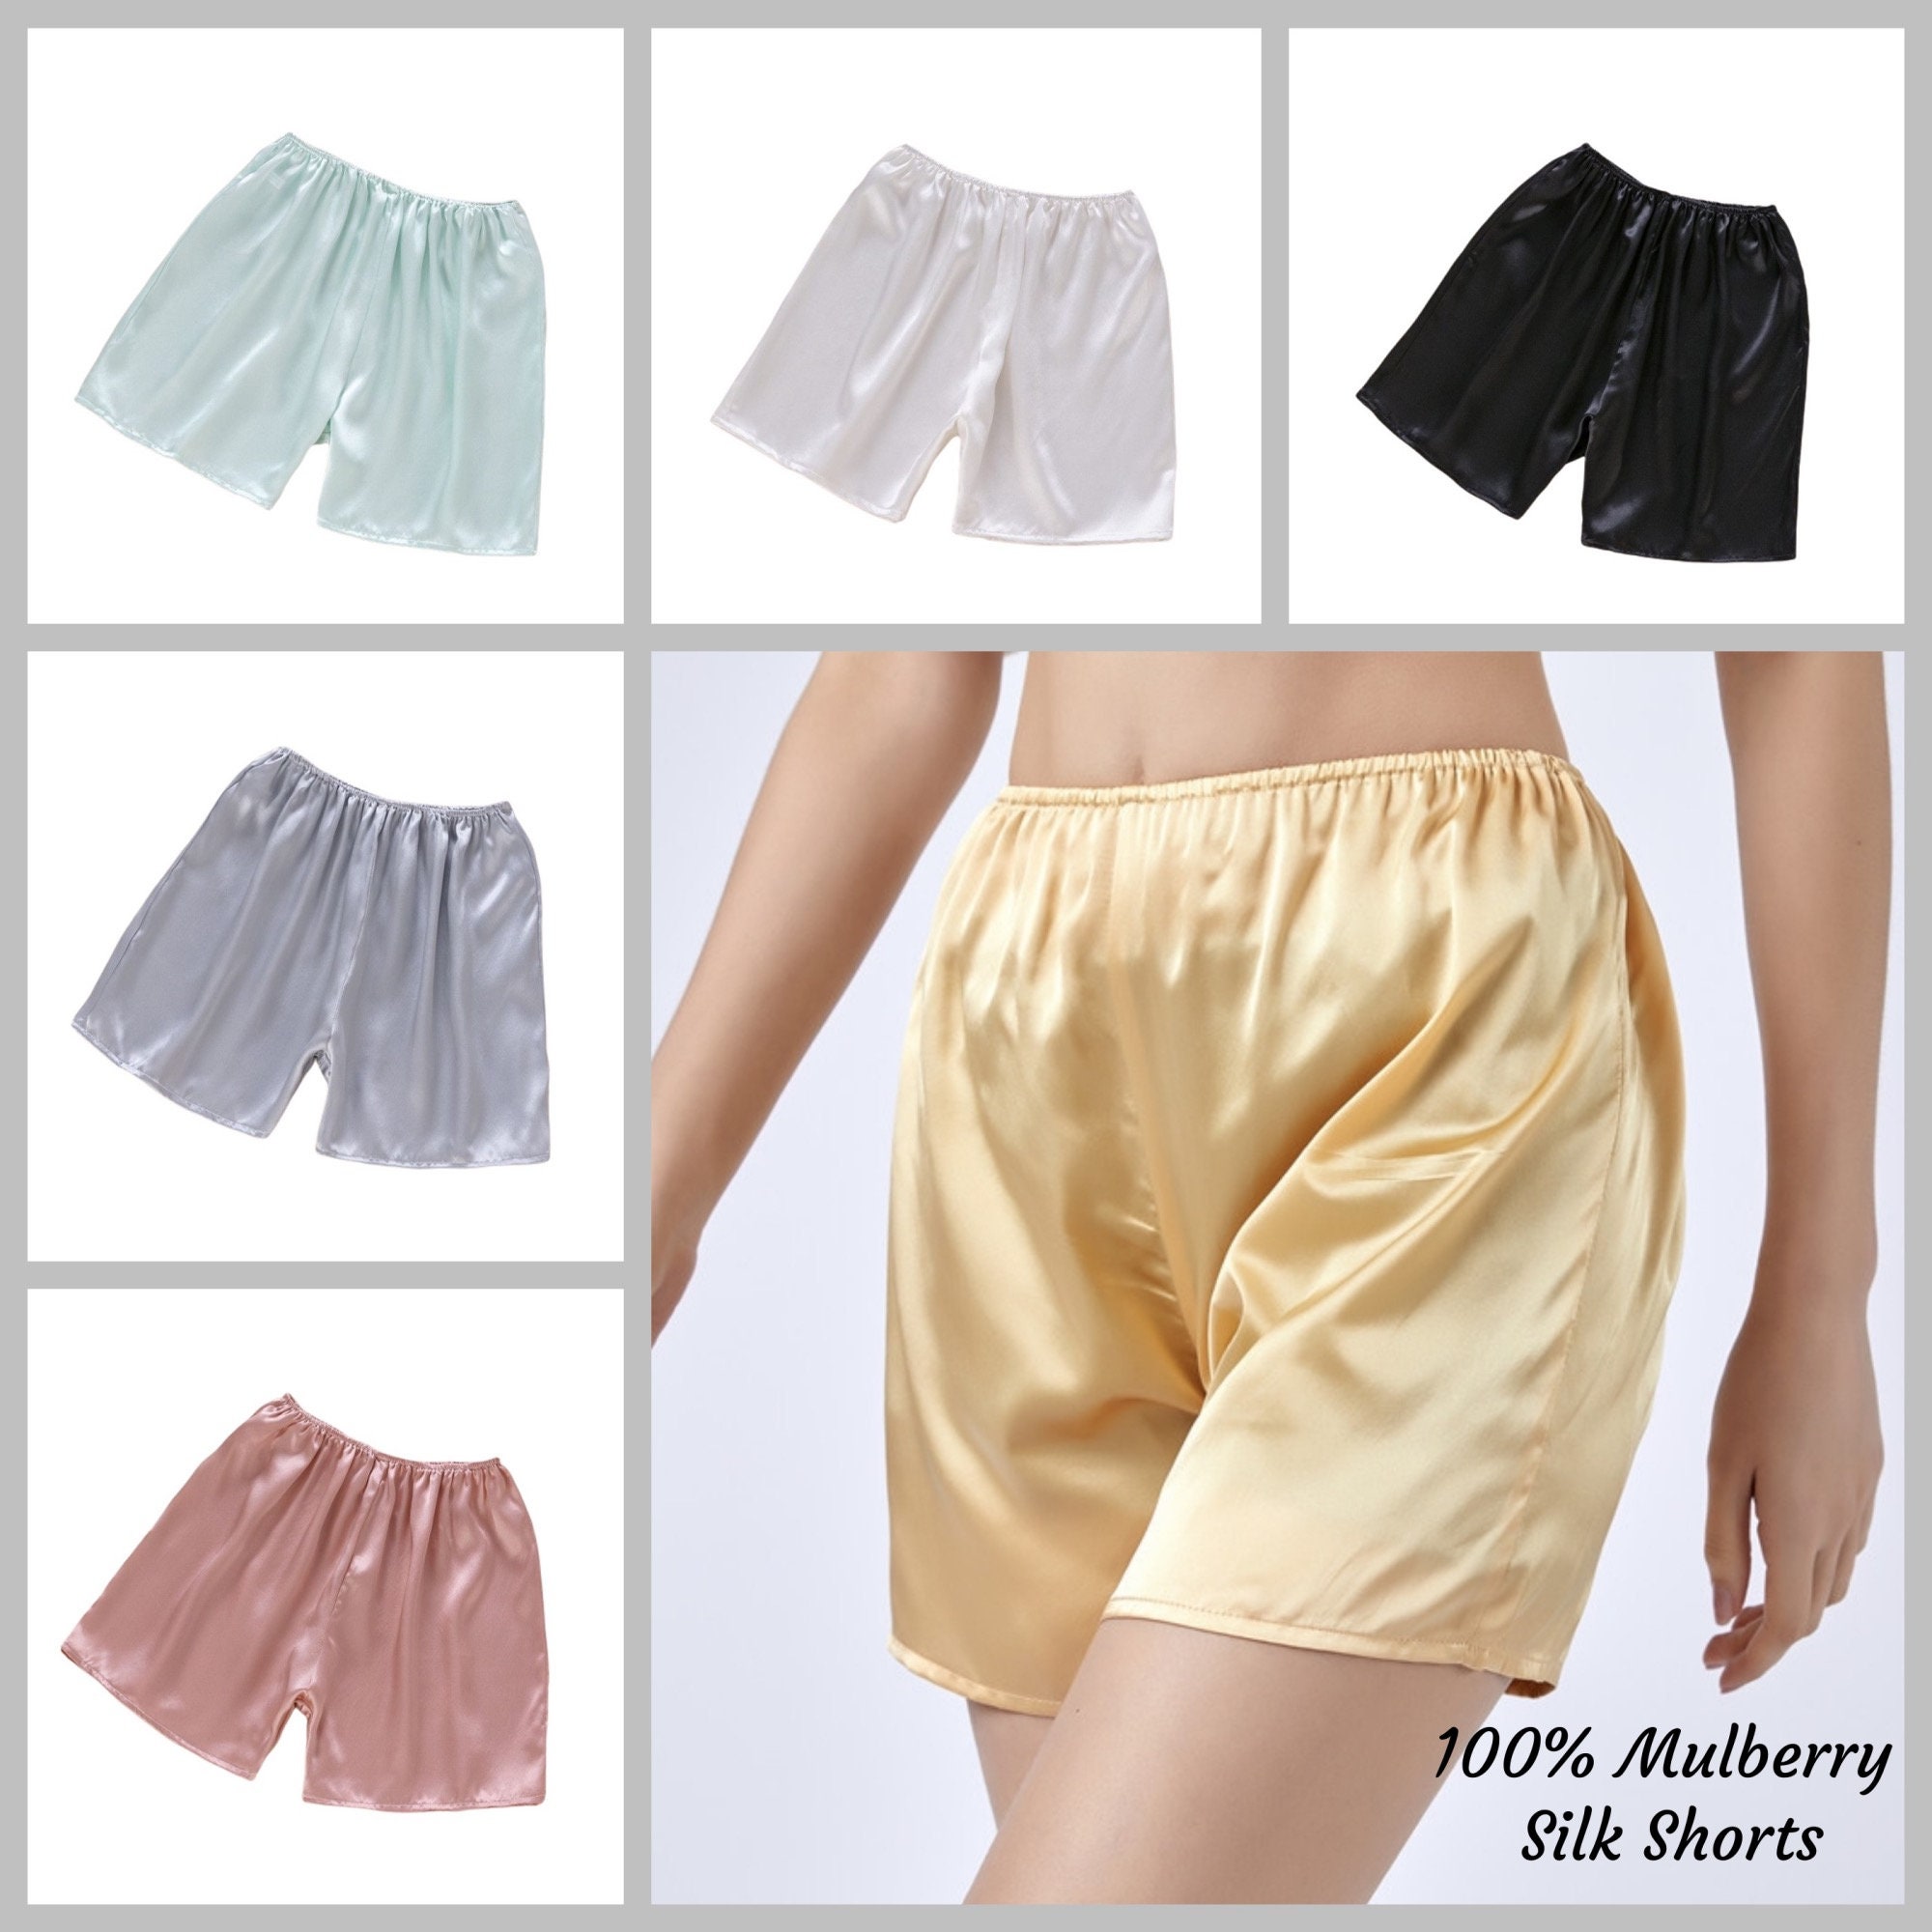 15 Best Shorts To Wear Under Dresses And Skirts  Shorts for under dresses,  Under dress, Shorts under dress